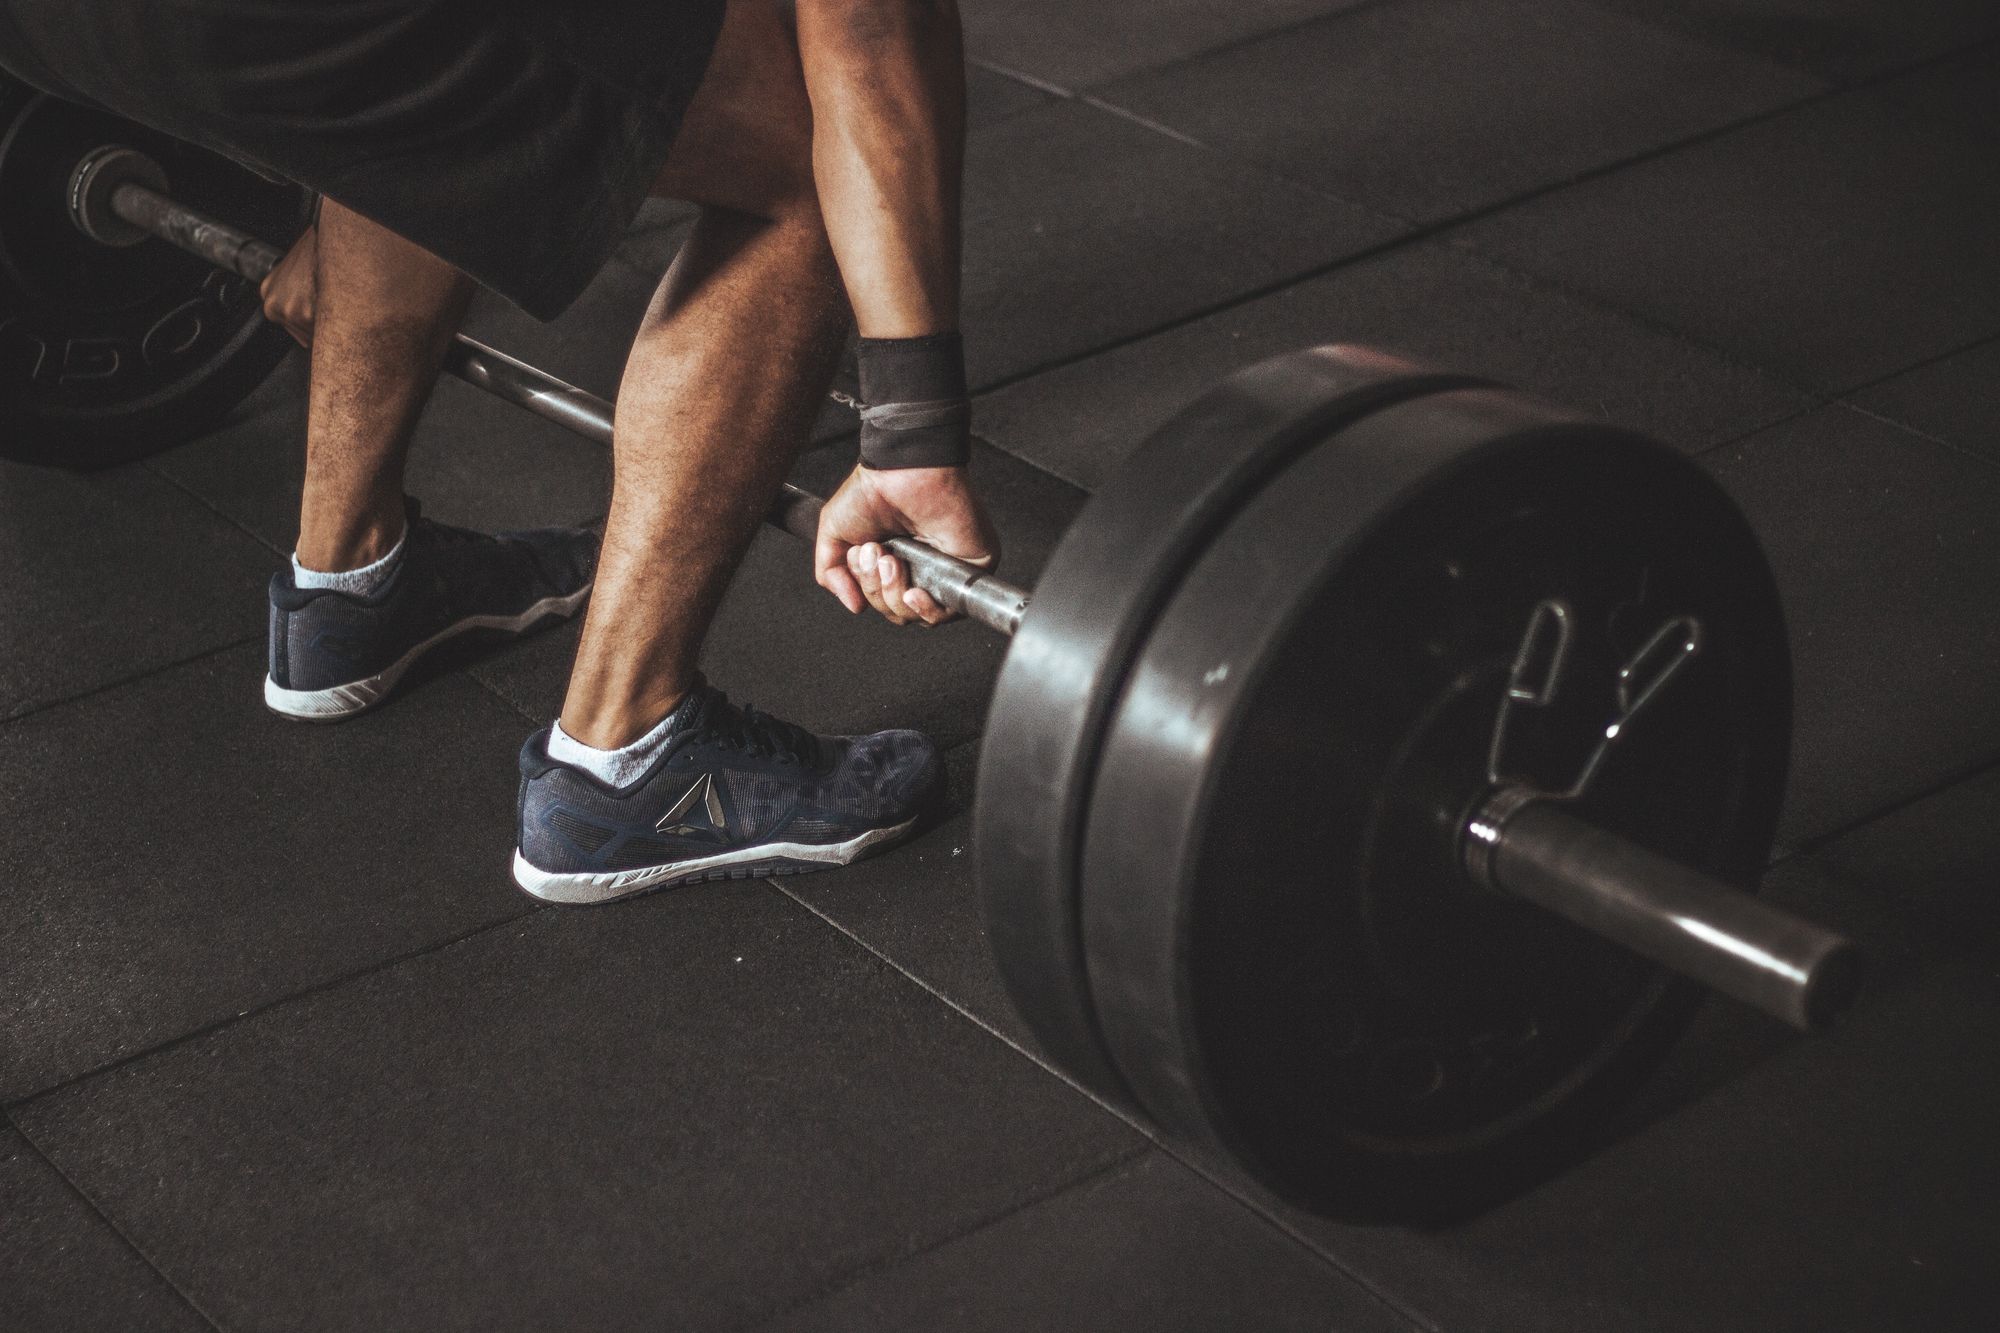 Photo by Victor Freitas: https://www.pexels.com/photo/man-in-black-reebok-shoes-about-to-carry-barbell-949129/